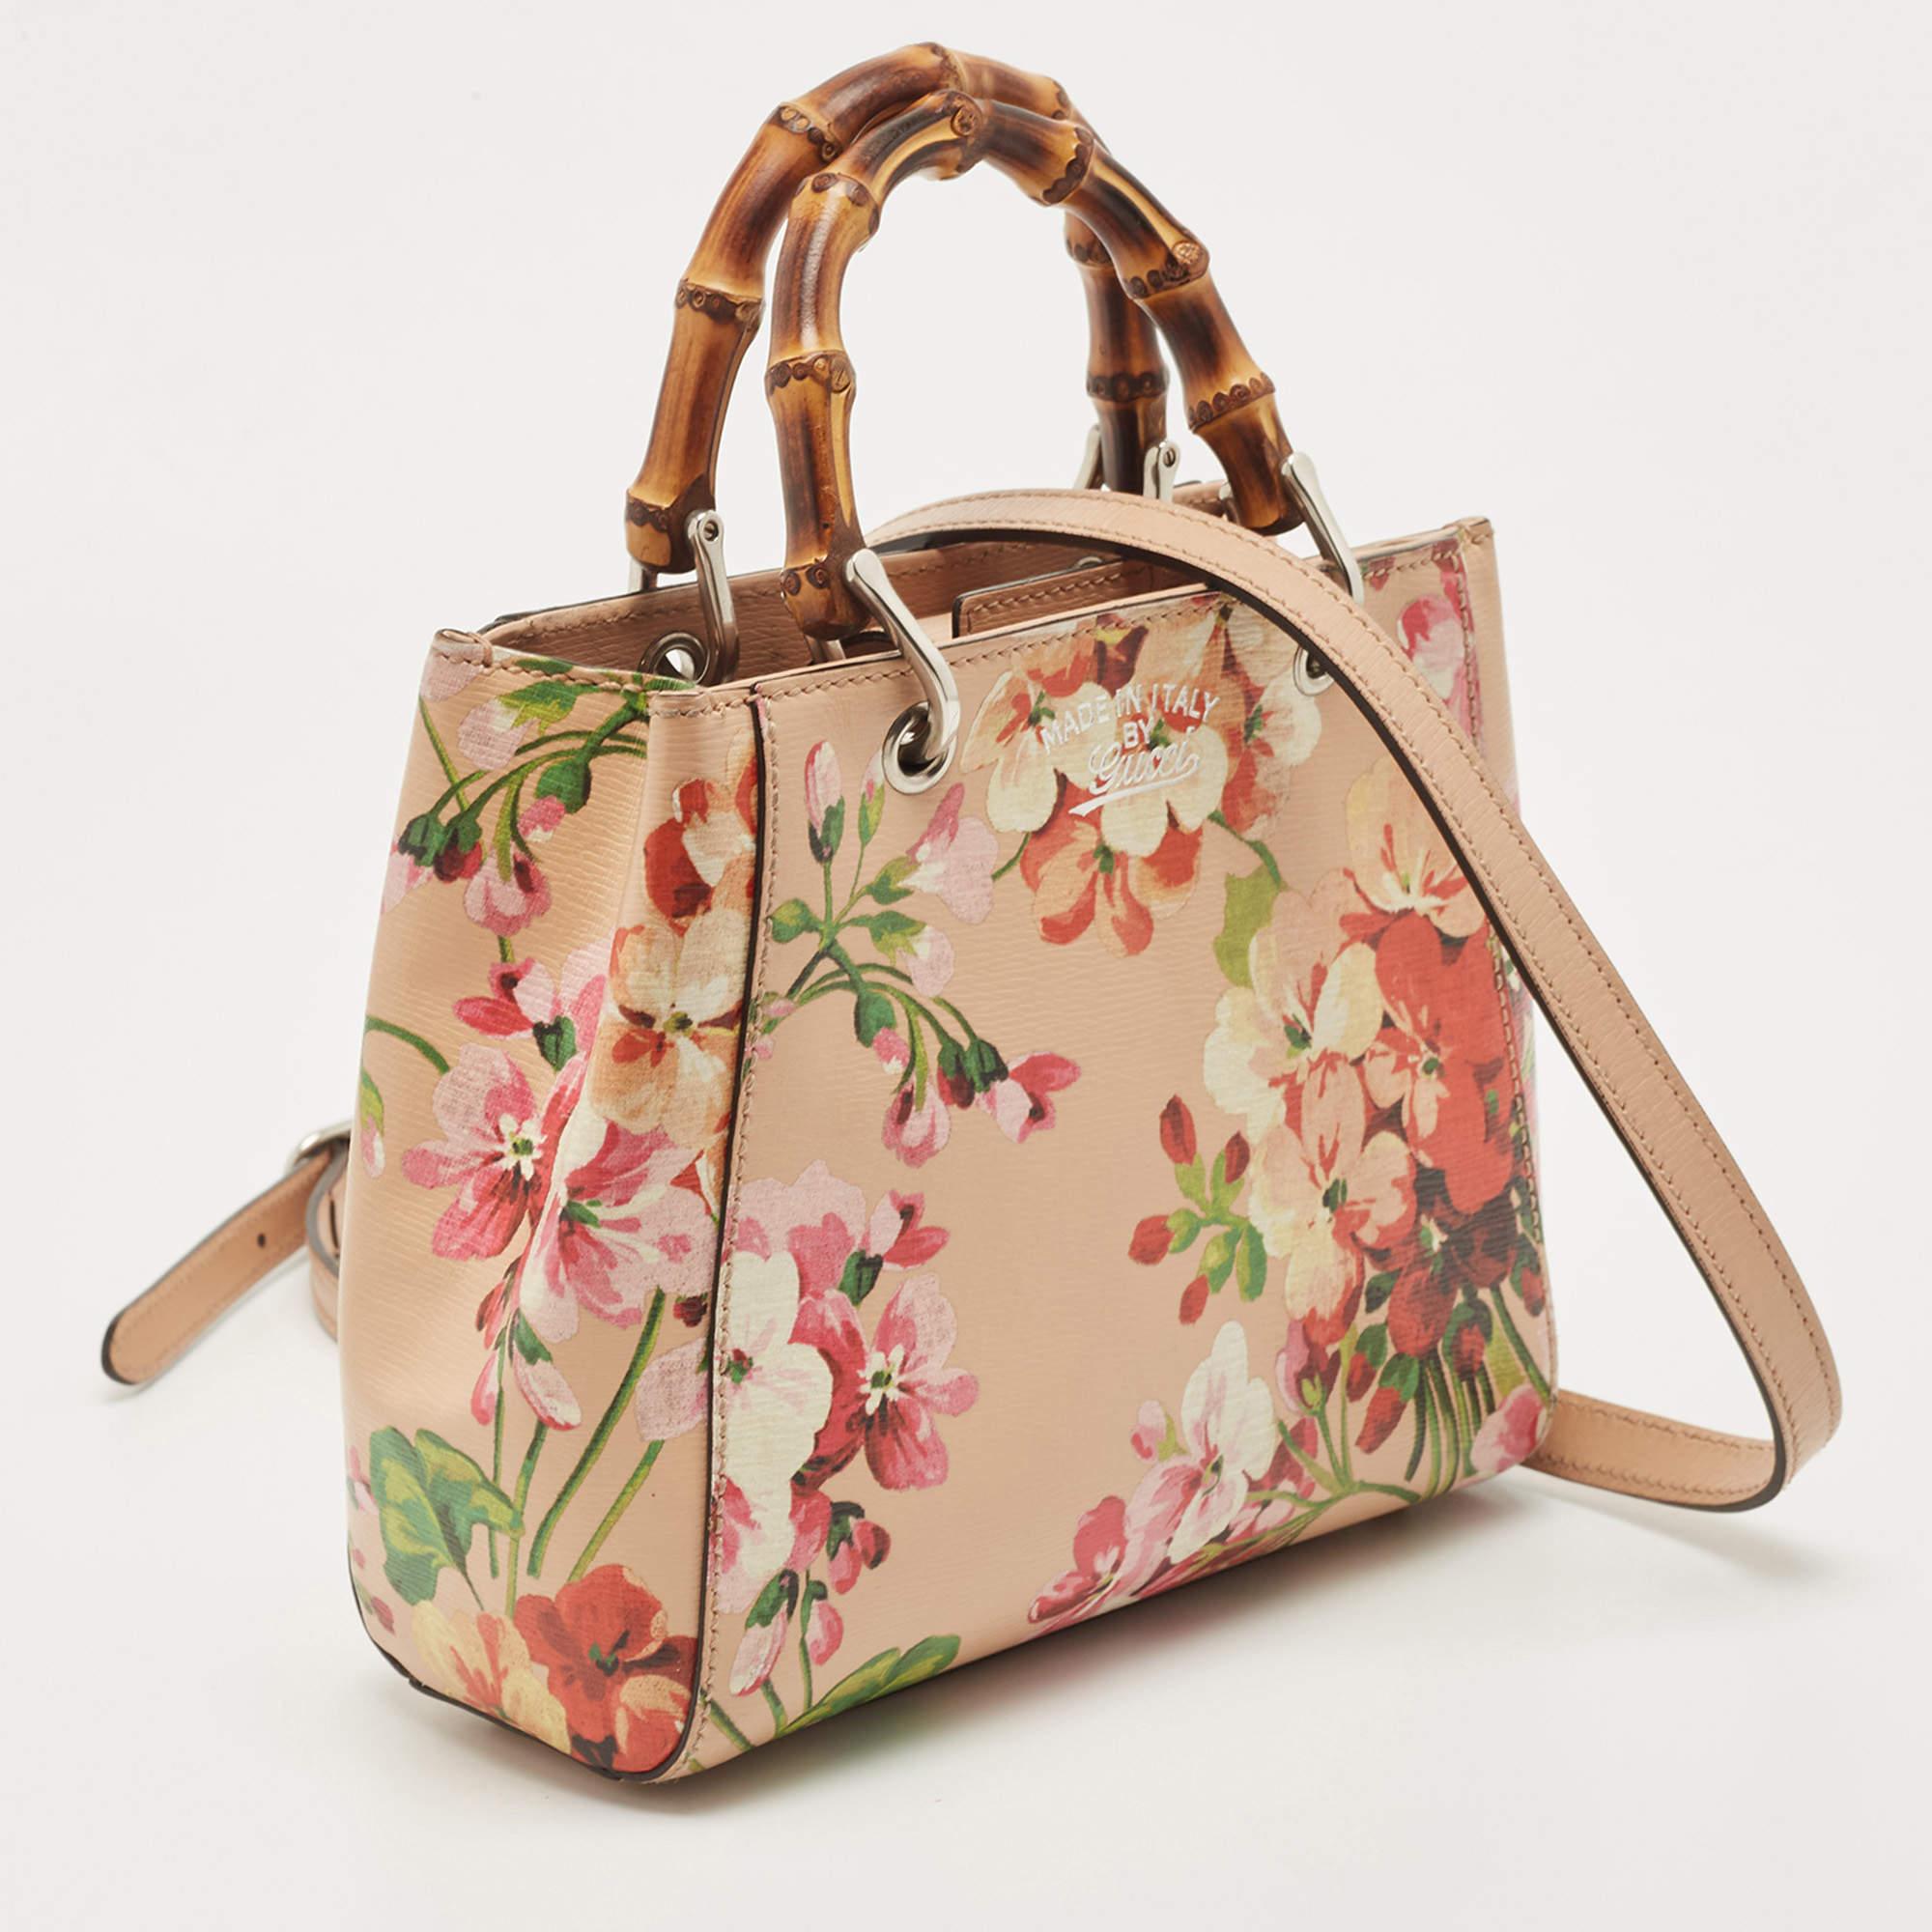 Handbags as fabulous as this one are hard to come by; so own this gorgeous tote from Gucci today and light up your closet! Crafted from printed leather, this tote has a lined interior and is wonderfully held by two Bamboo handles, making the piece